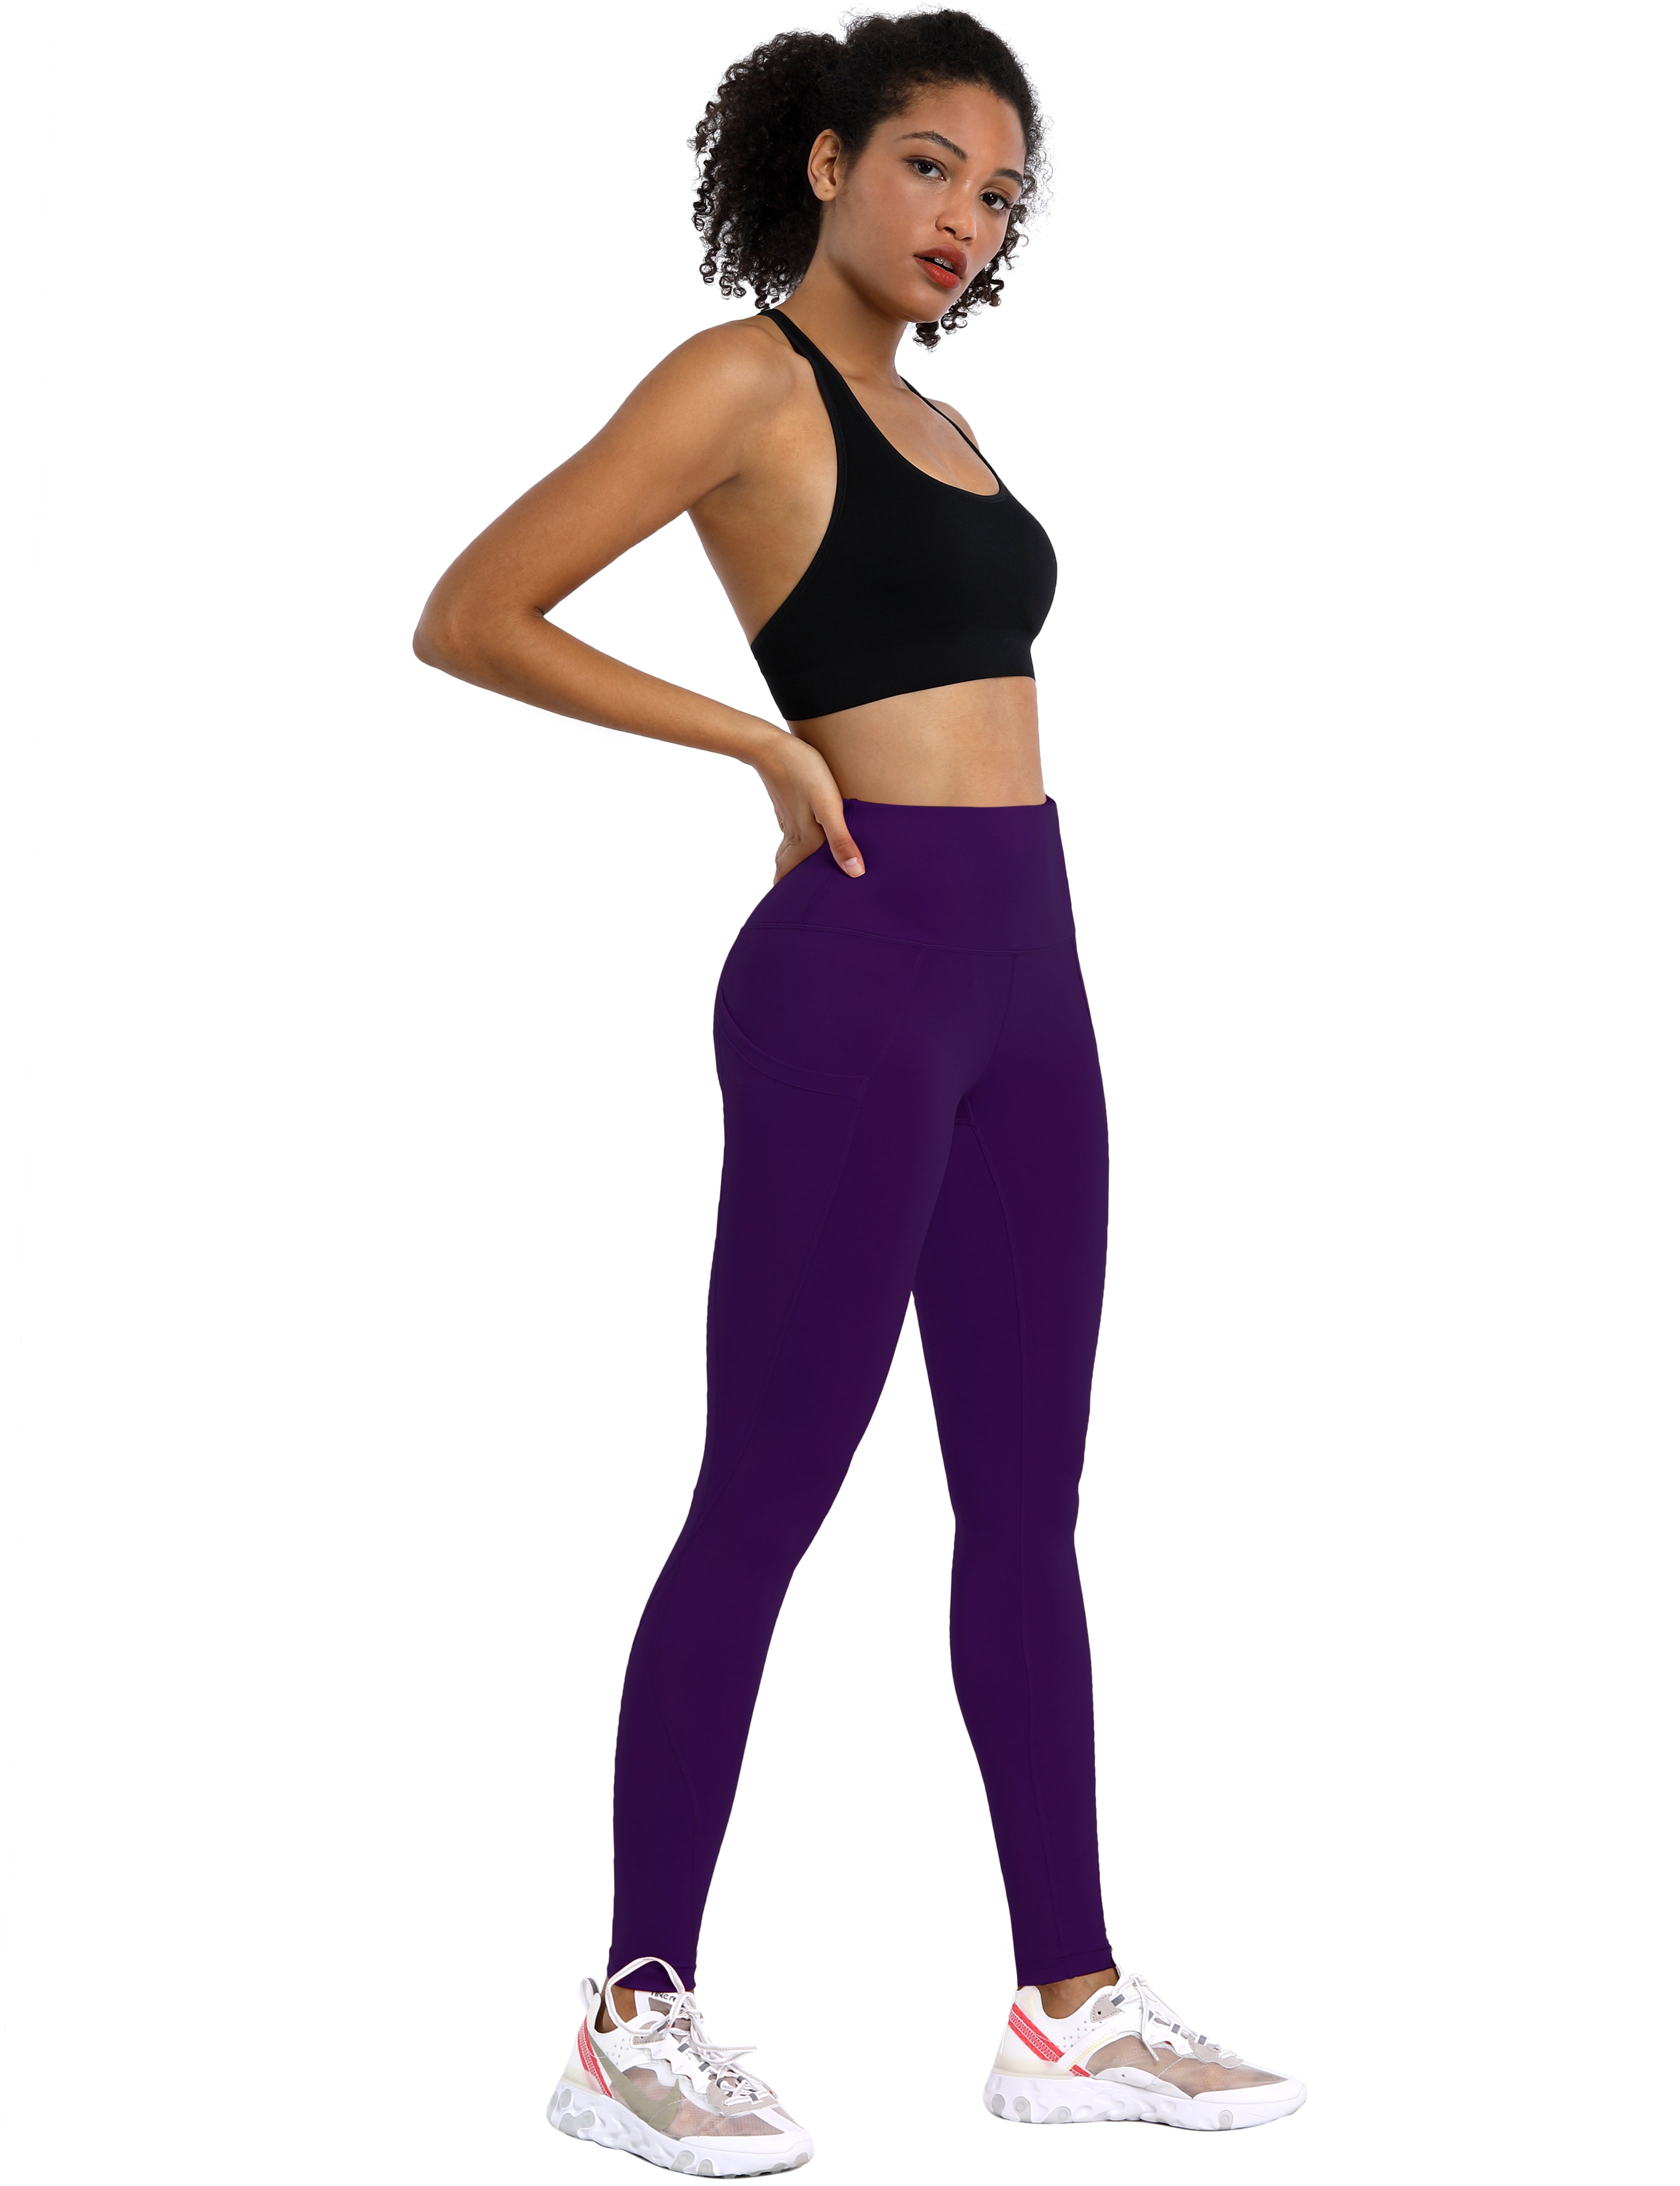 High Waist Side Pockets Golf Pants pansypurple 75% Nylon, 25% Spandex Fabric doesn't attract lint easily 4-way stretch No see-through Moisture-wicking Tummy control Inner pocket